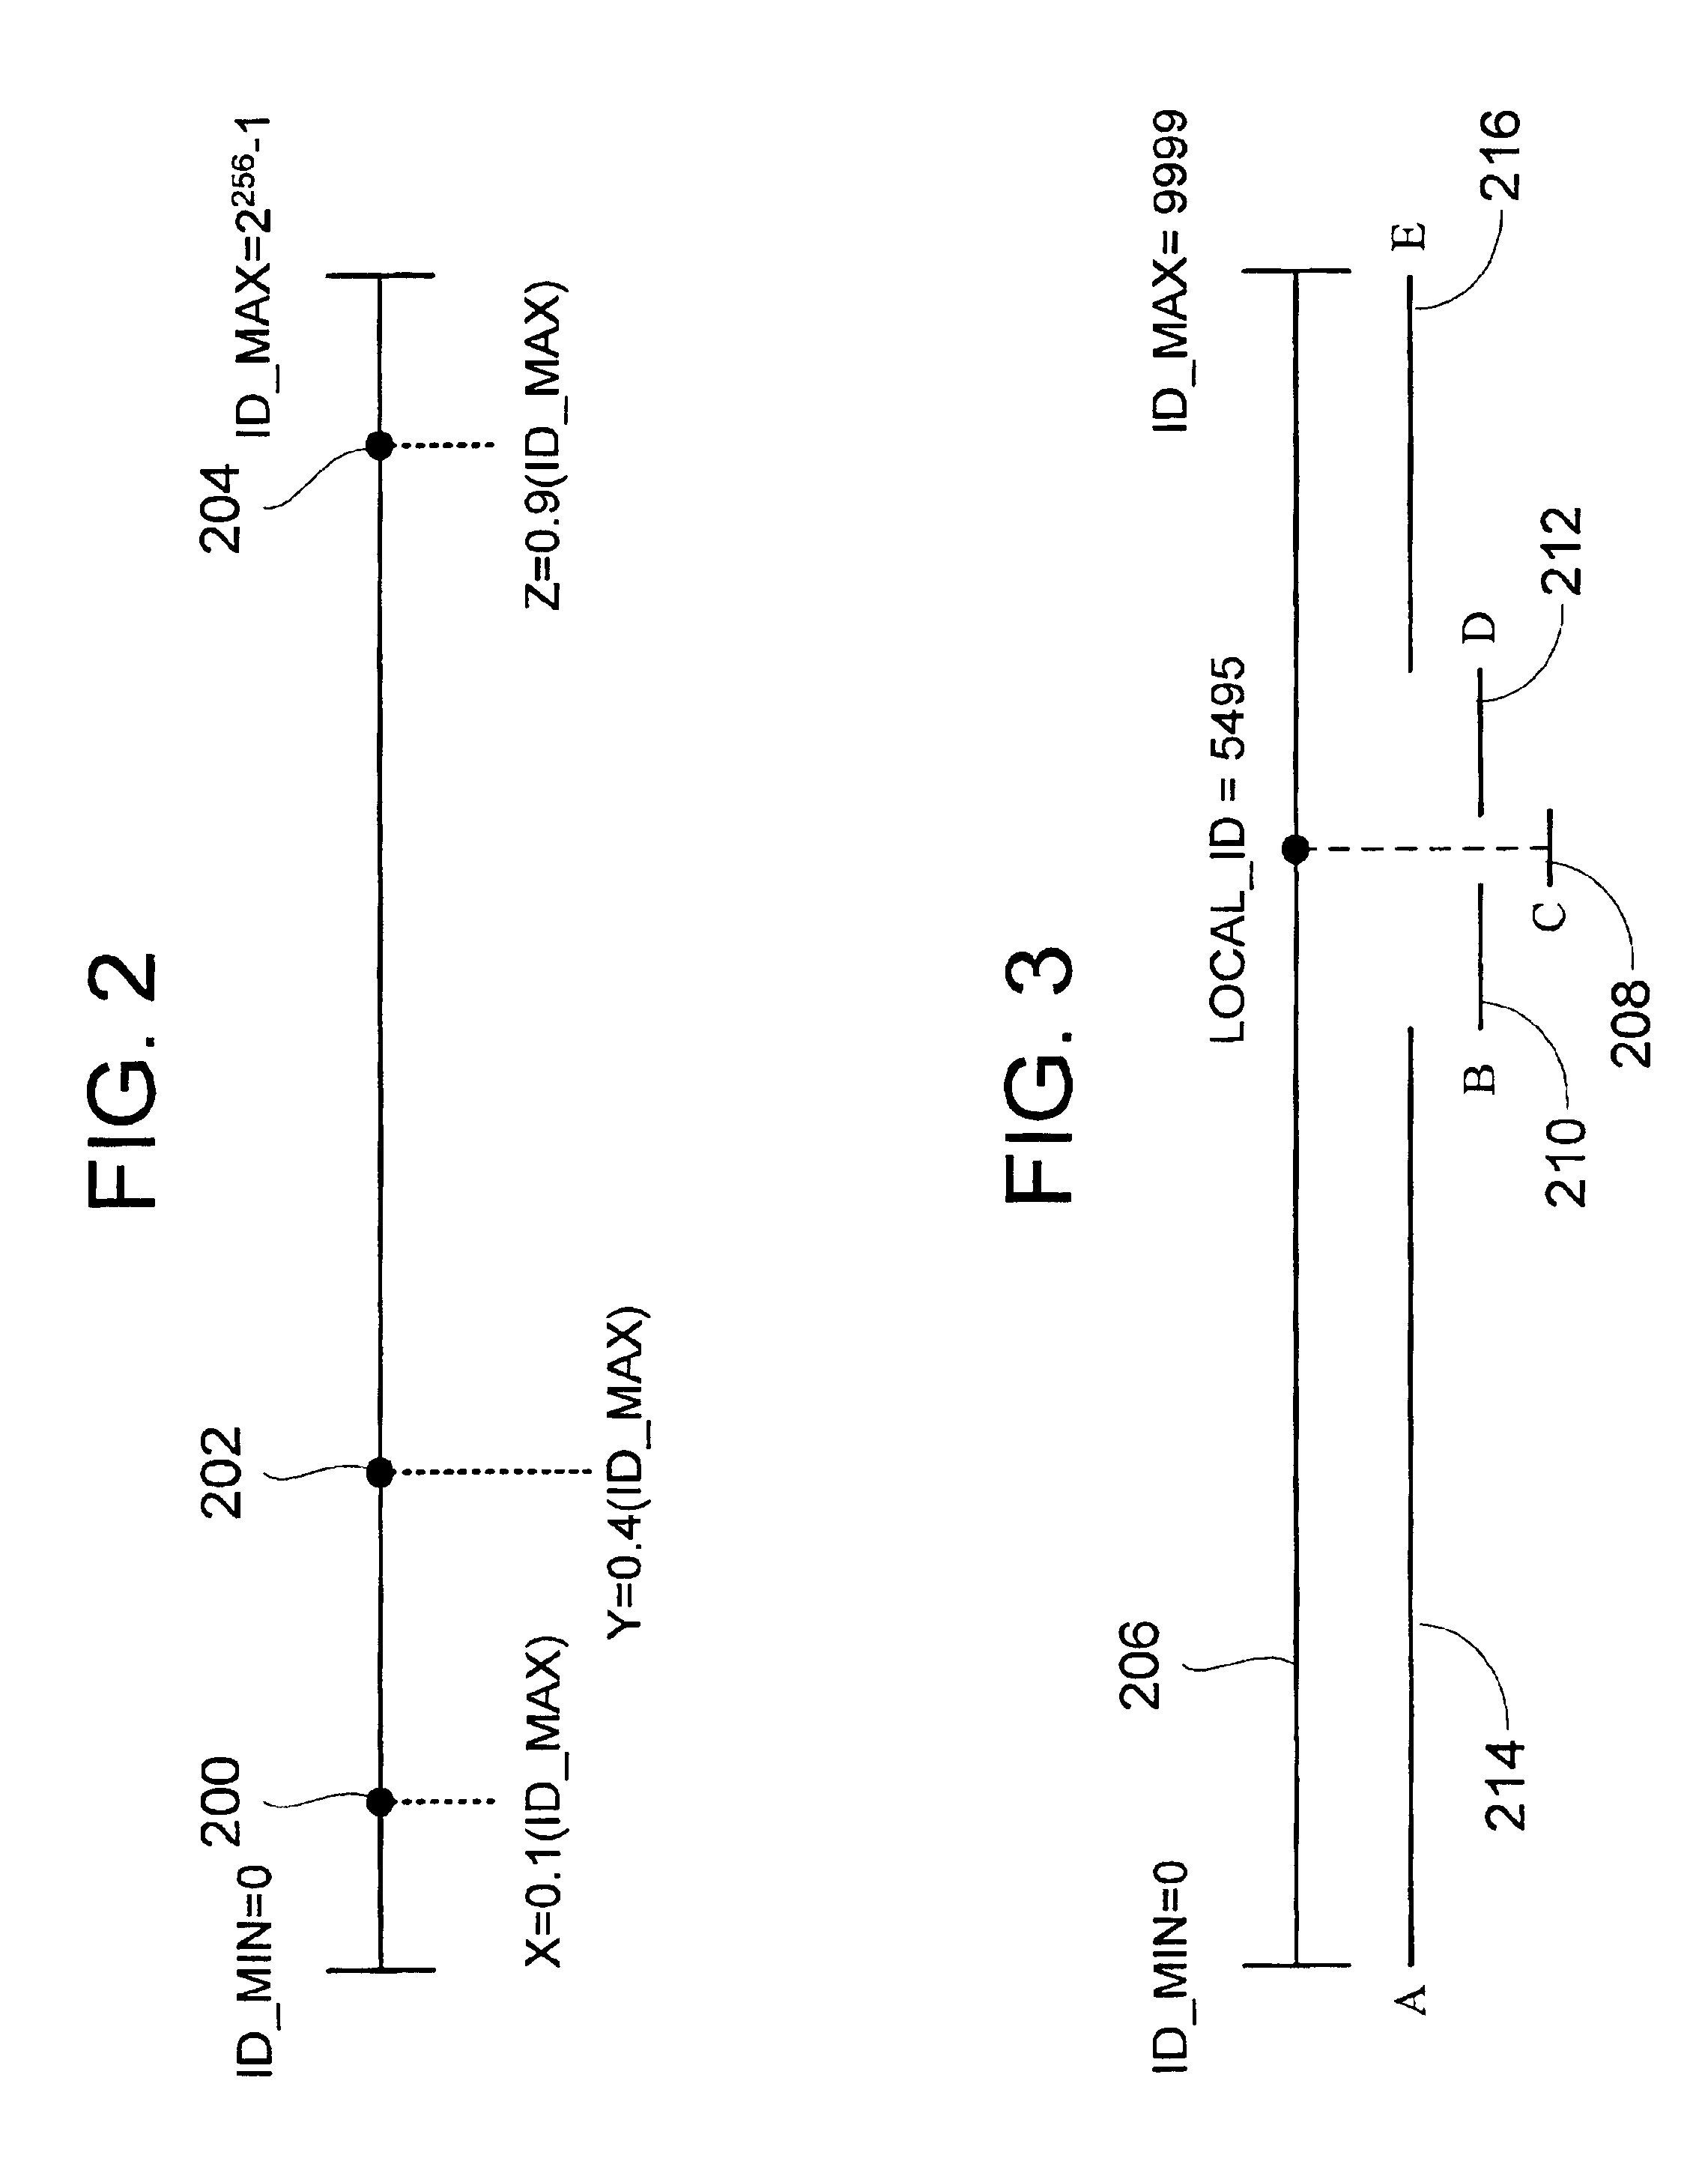 Multi-level cache architecture and cache management method for peer-to-peer name resolution protocol